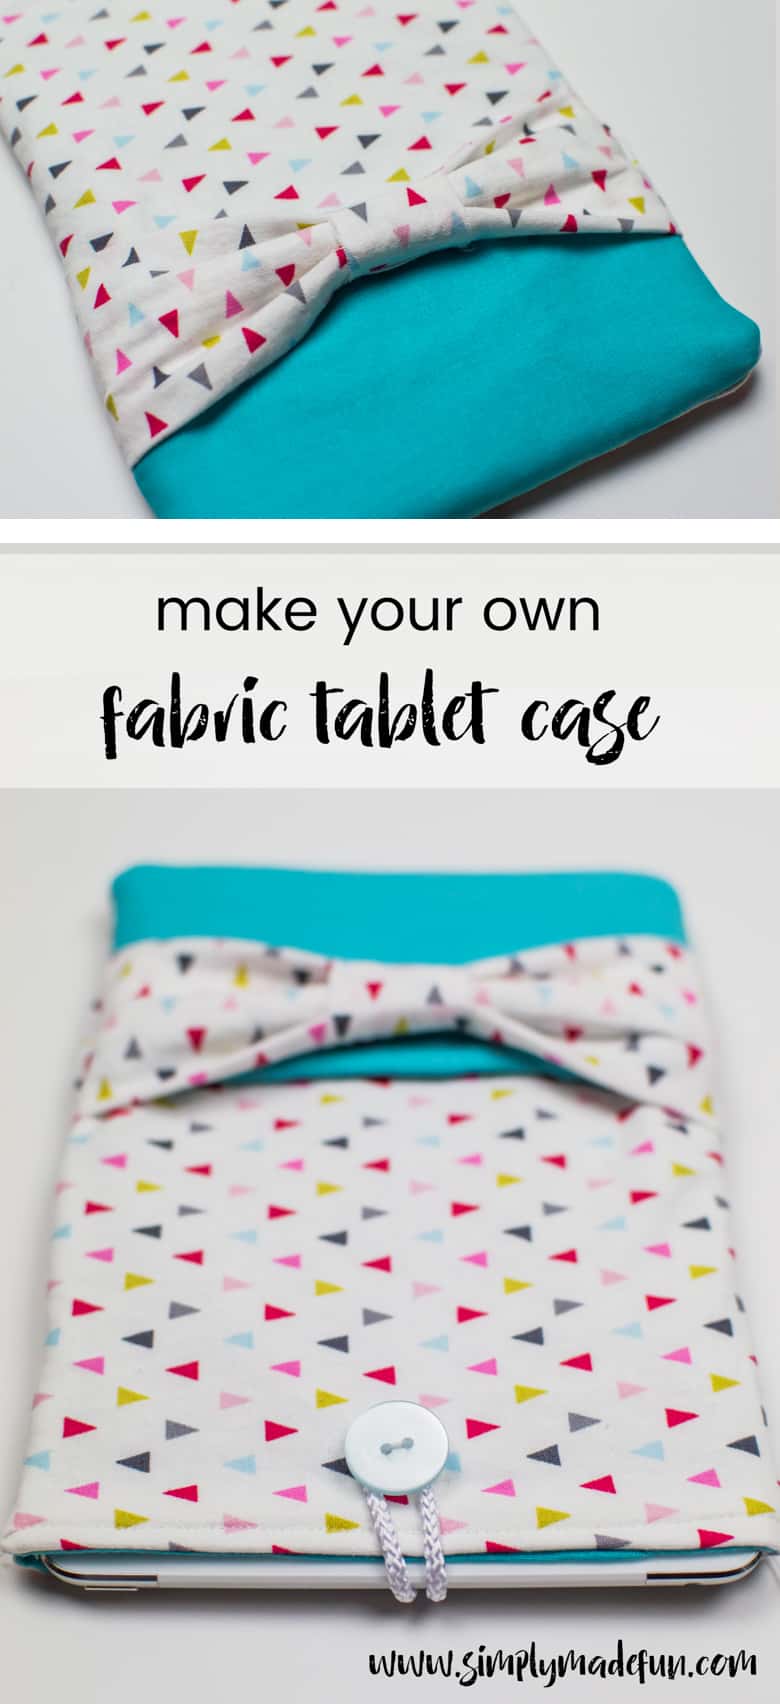 Travel with your electronics in style and learn how to make your very own fabric tablet case with this easy-to-follow tutorial!